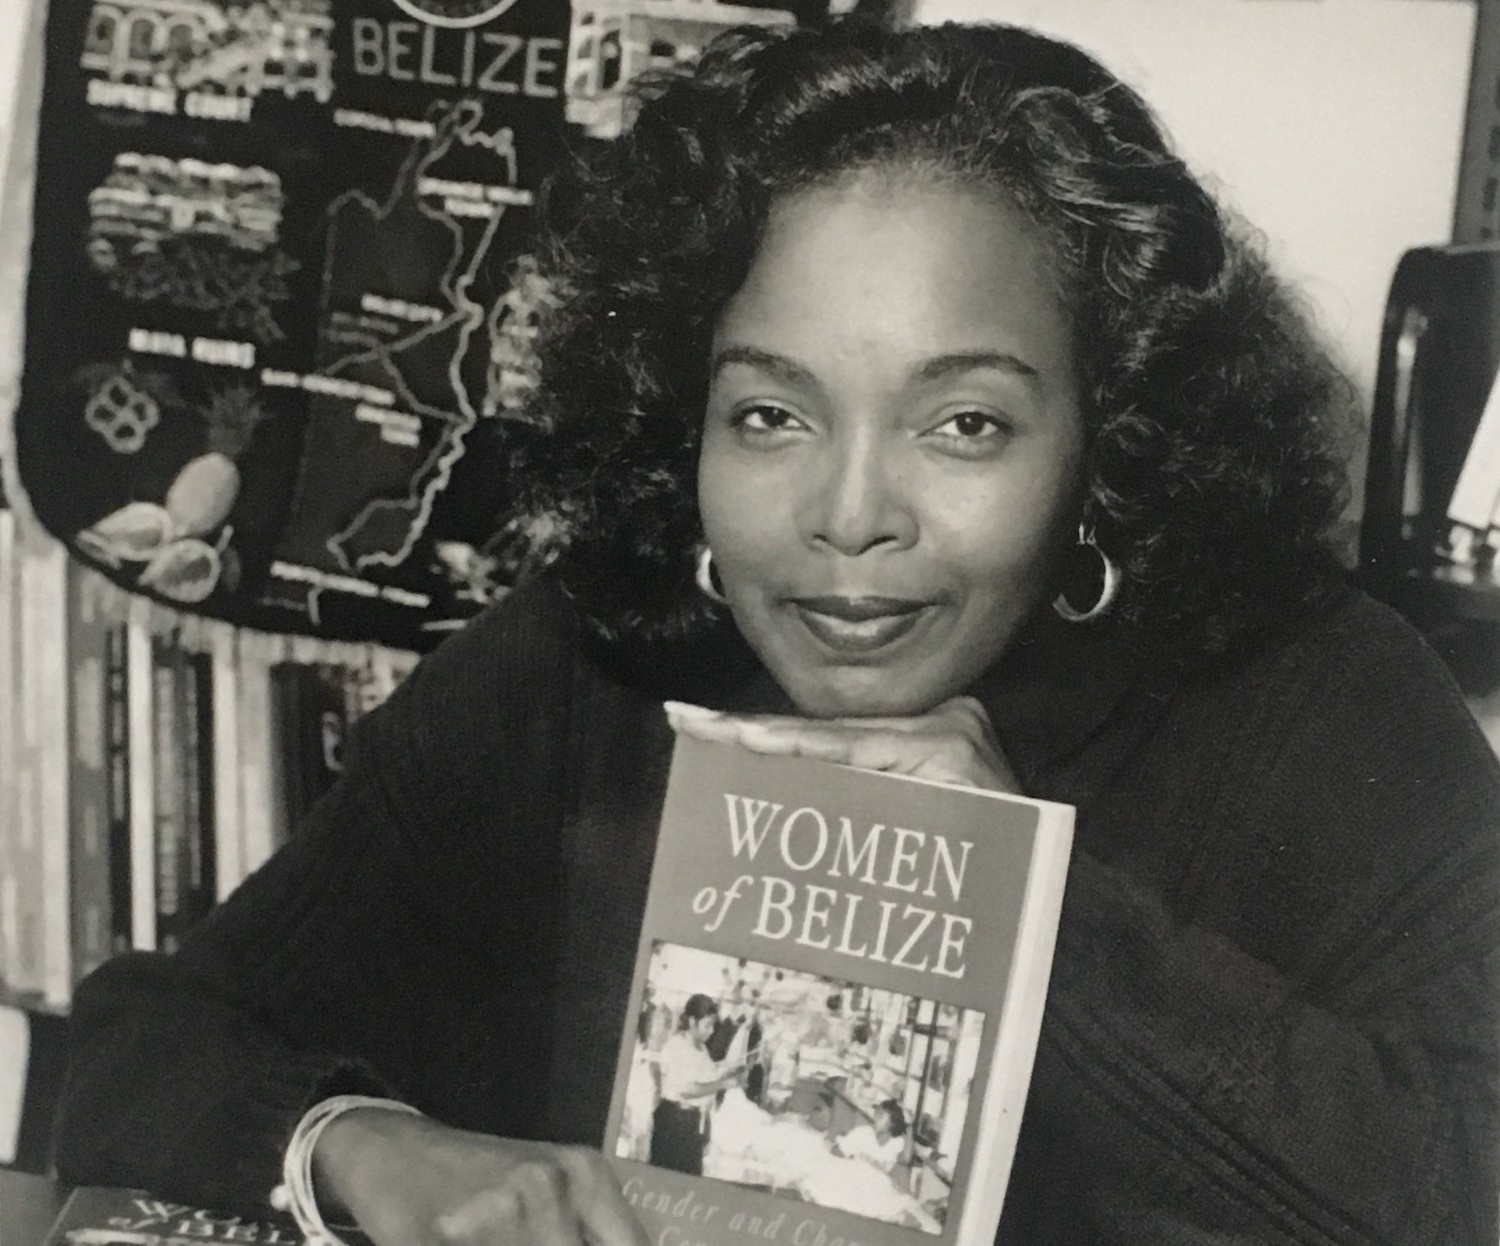 Essay: After George Floyd, Black-owned bookstores bloomed across